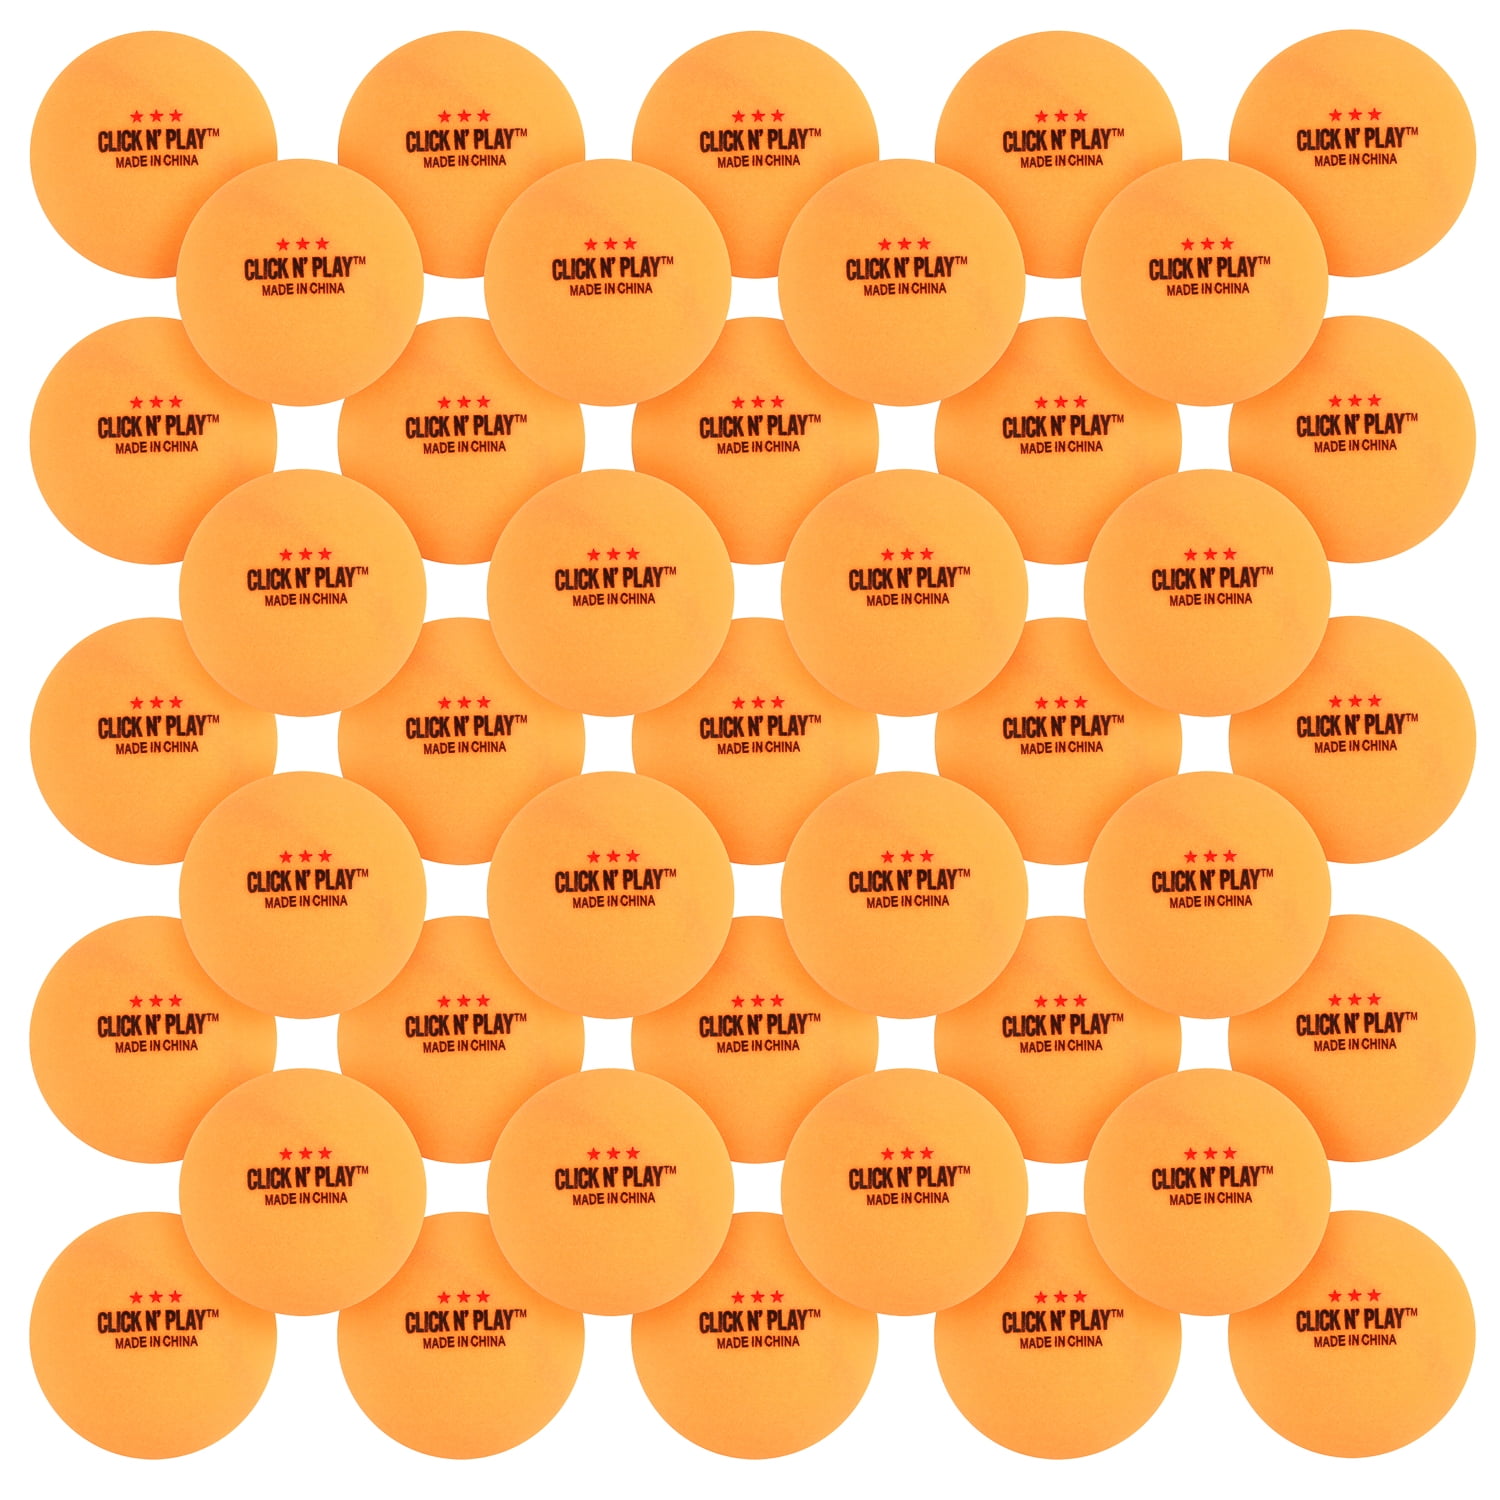 Details about   White/Orange Table Tennis Balls Ping Pong Toy Game 40mm New UK Seller 12 Pack 